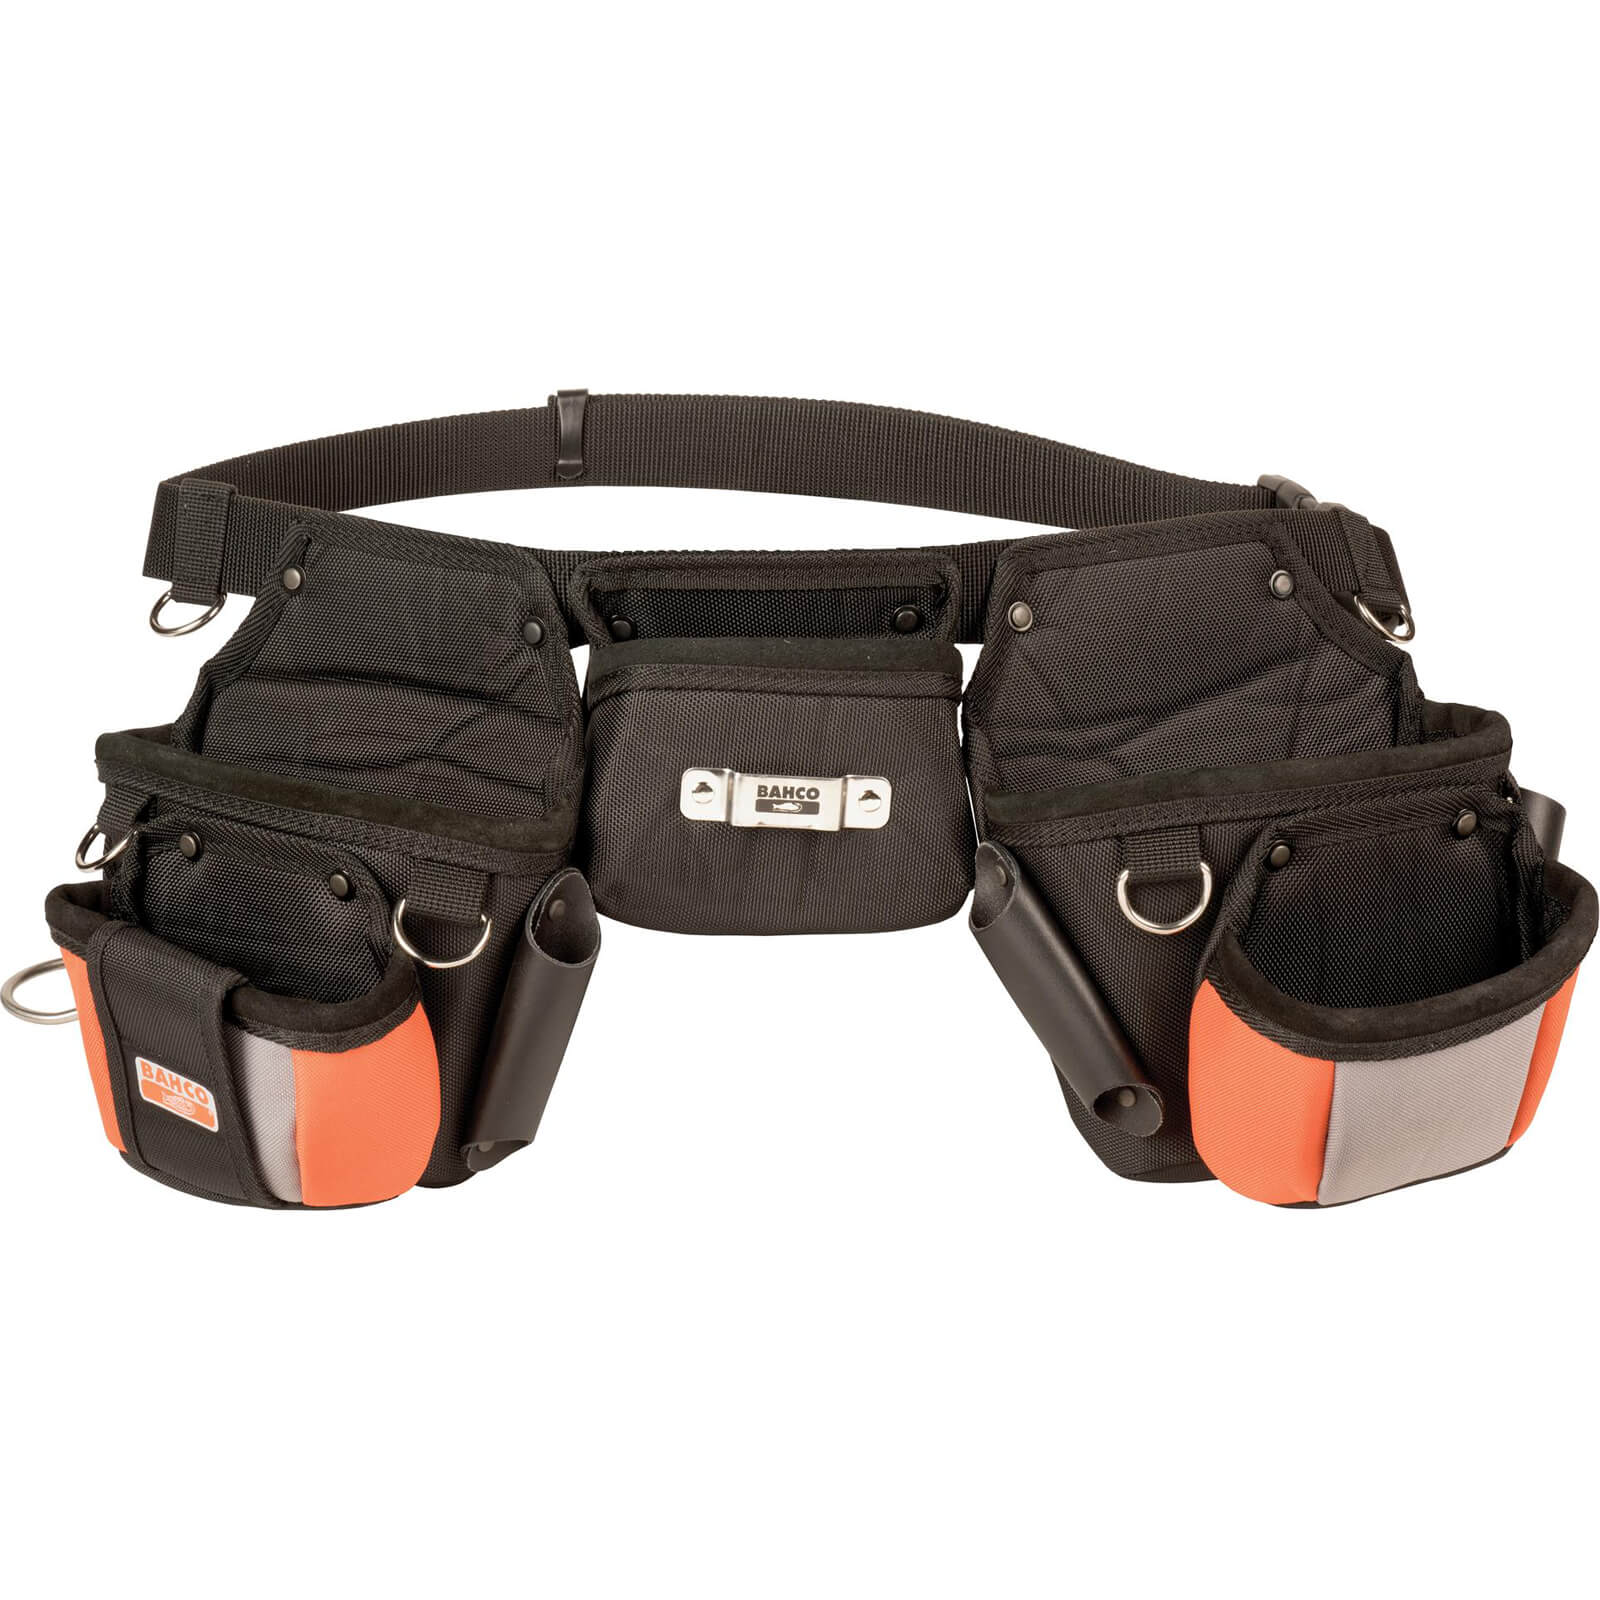 Bahco 3 Pouches Tool Belt